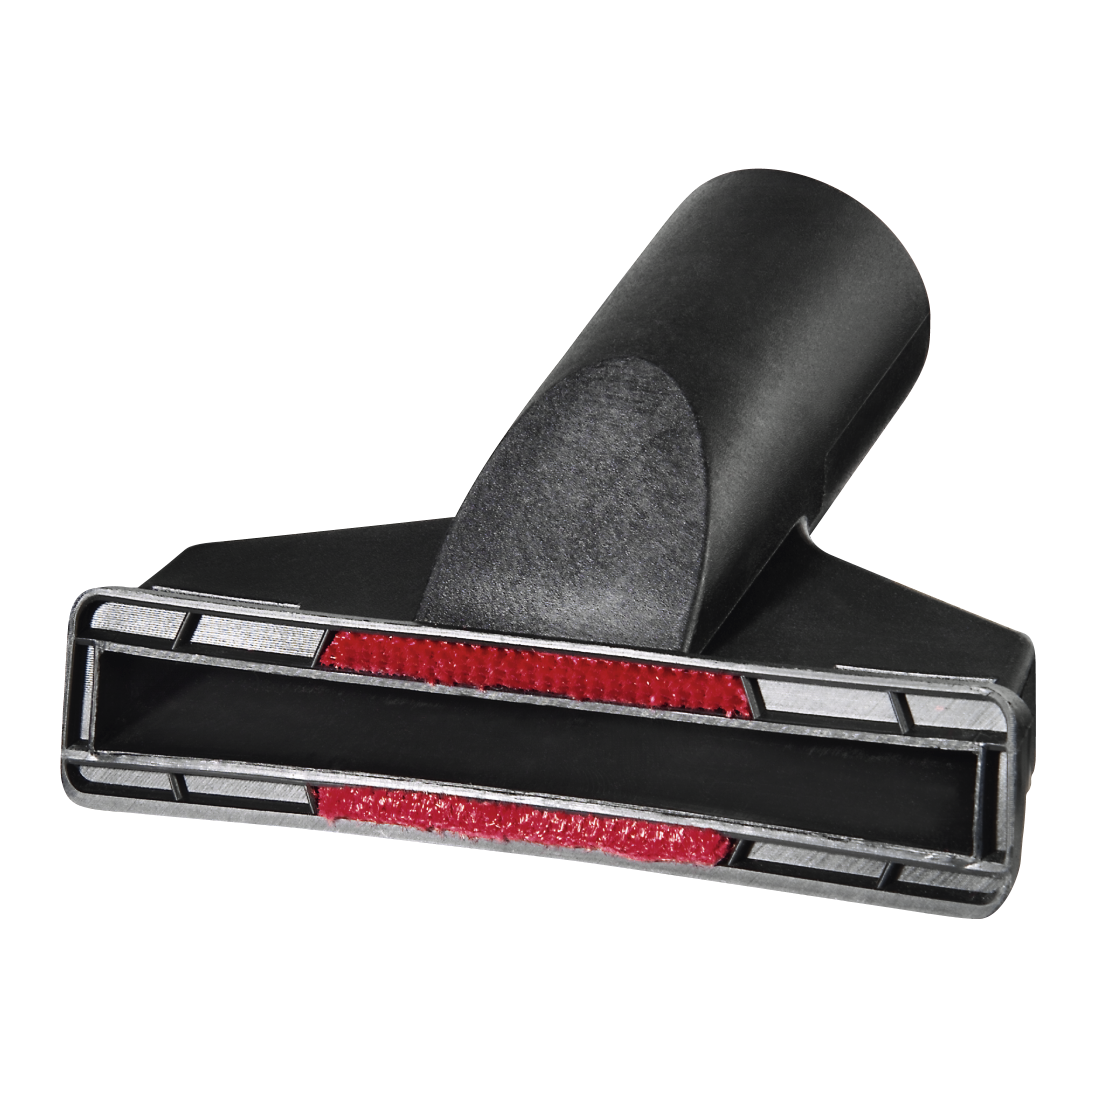 abx2 High-Res Image 2 - Xavax, Brosse pour coussins